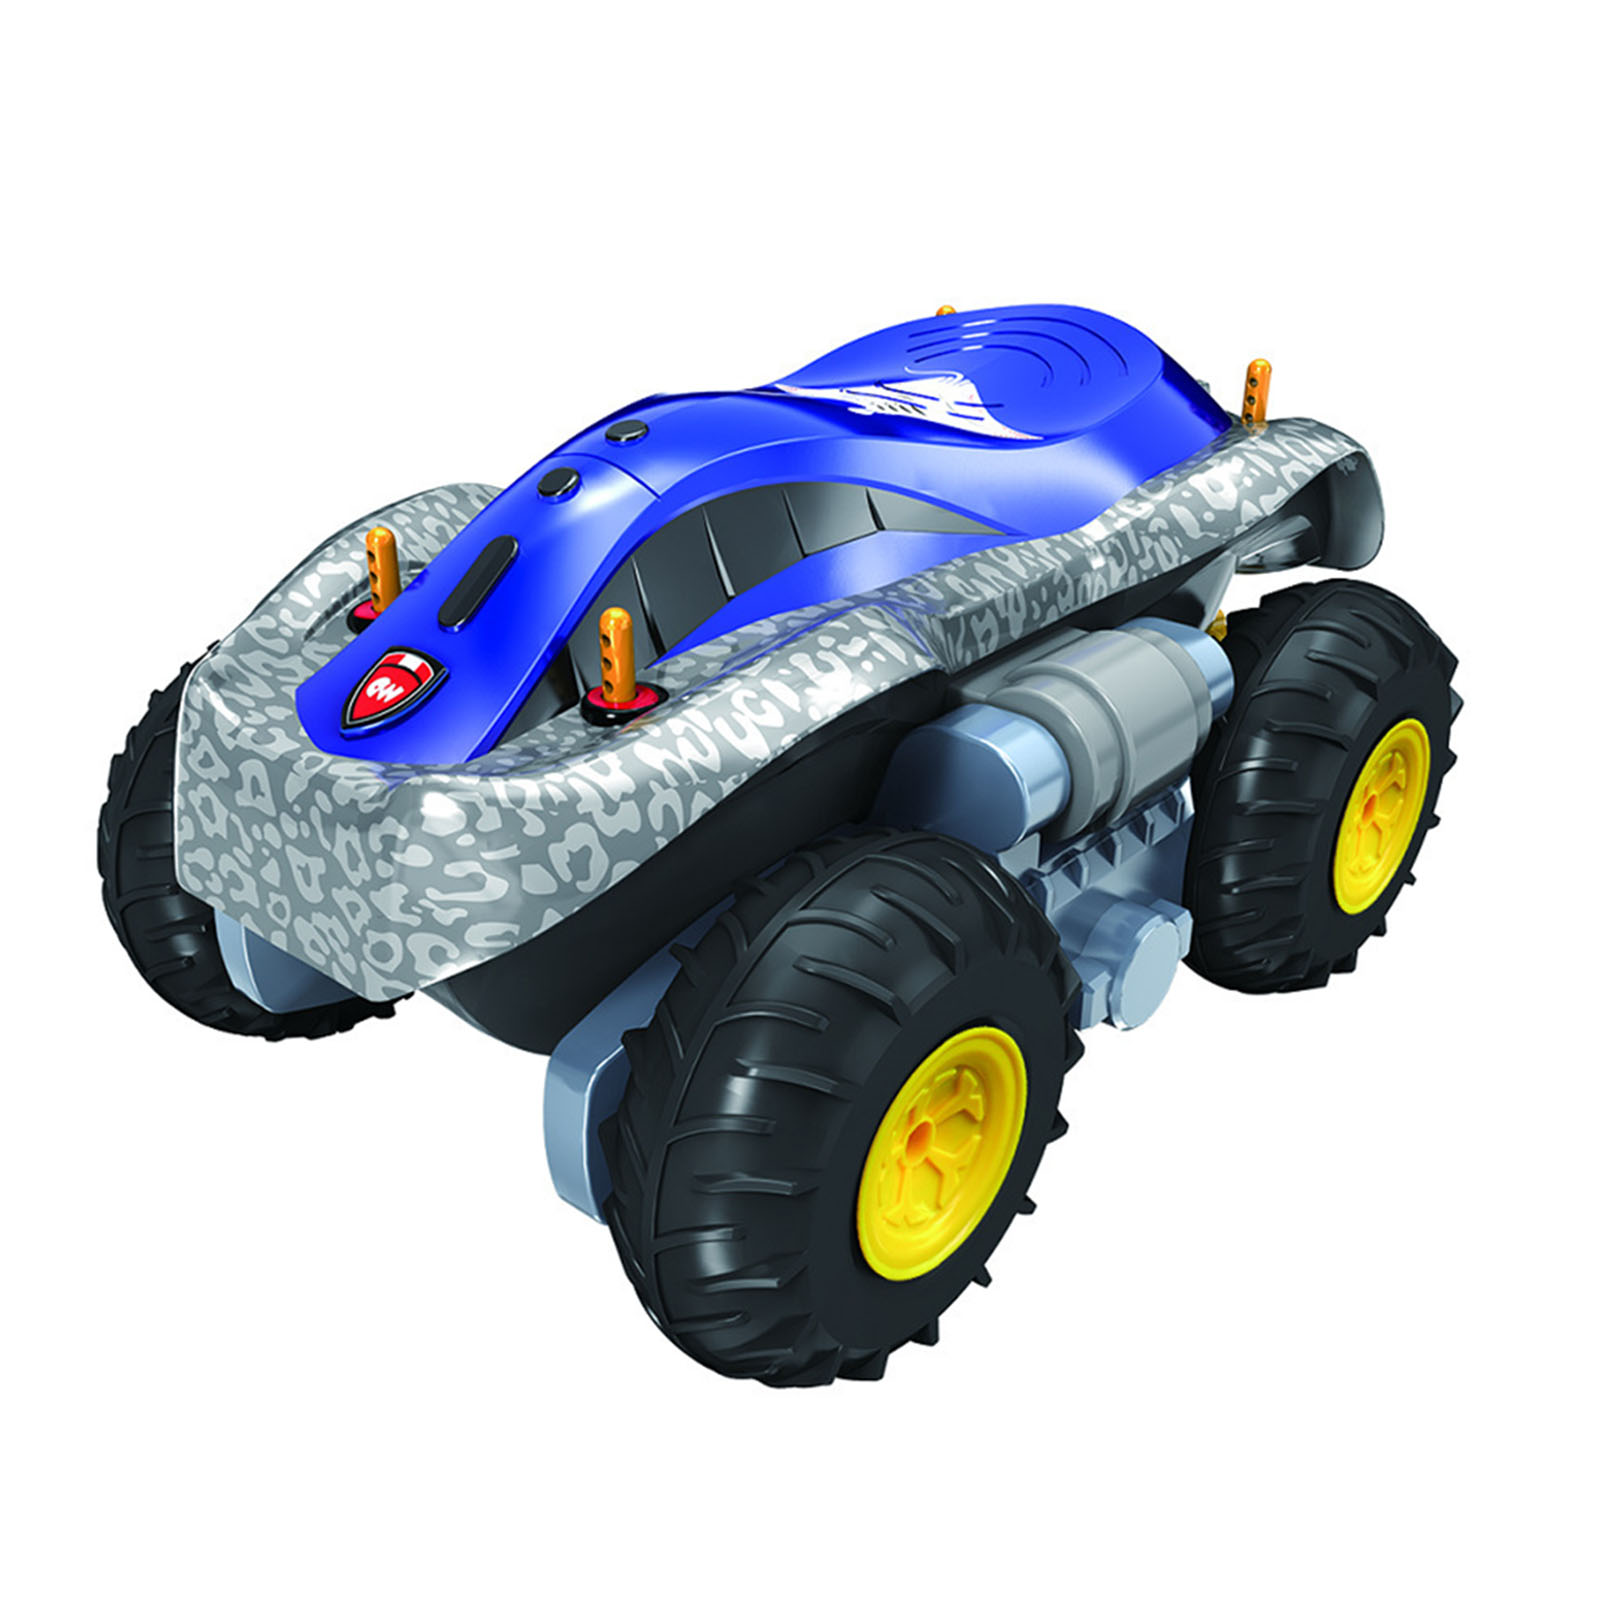 2.4g Amphibious RC Car 6ch Electric Remote Control Off-Road Vehicle Deformation Yacht with Pneumatic Tires